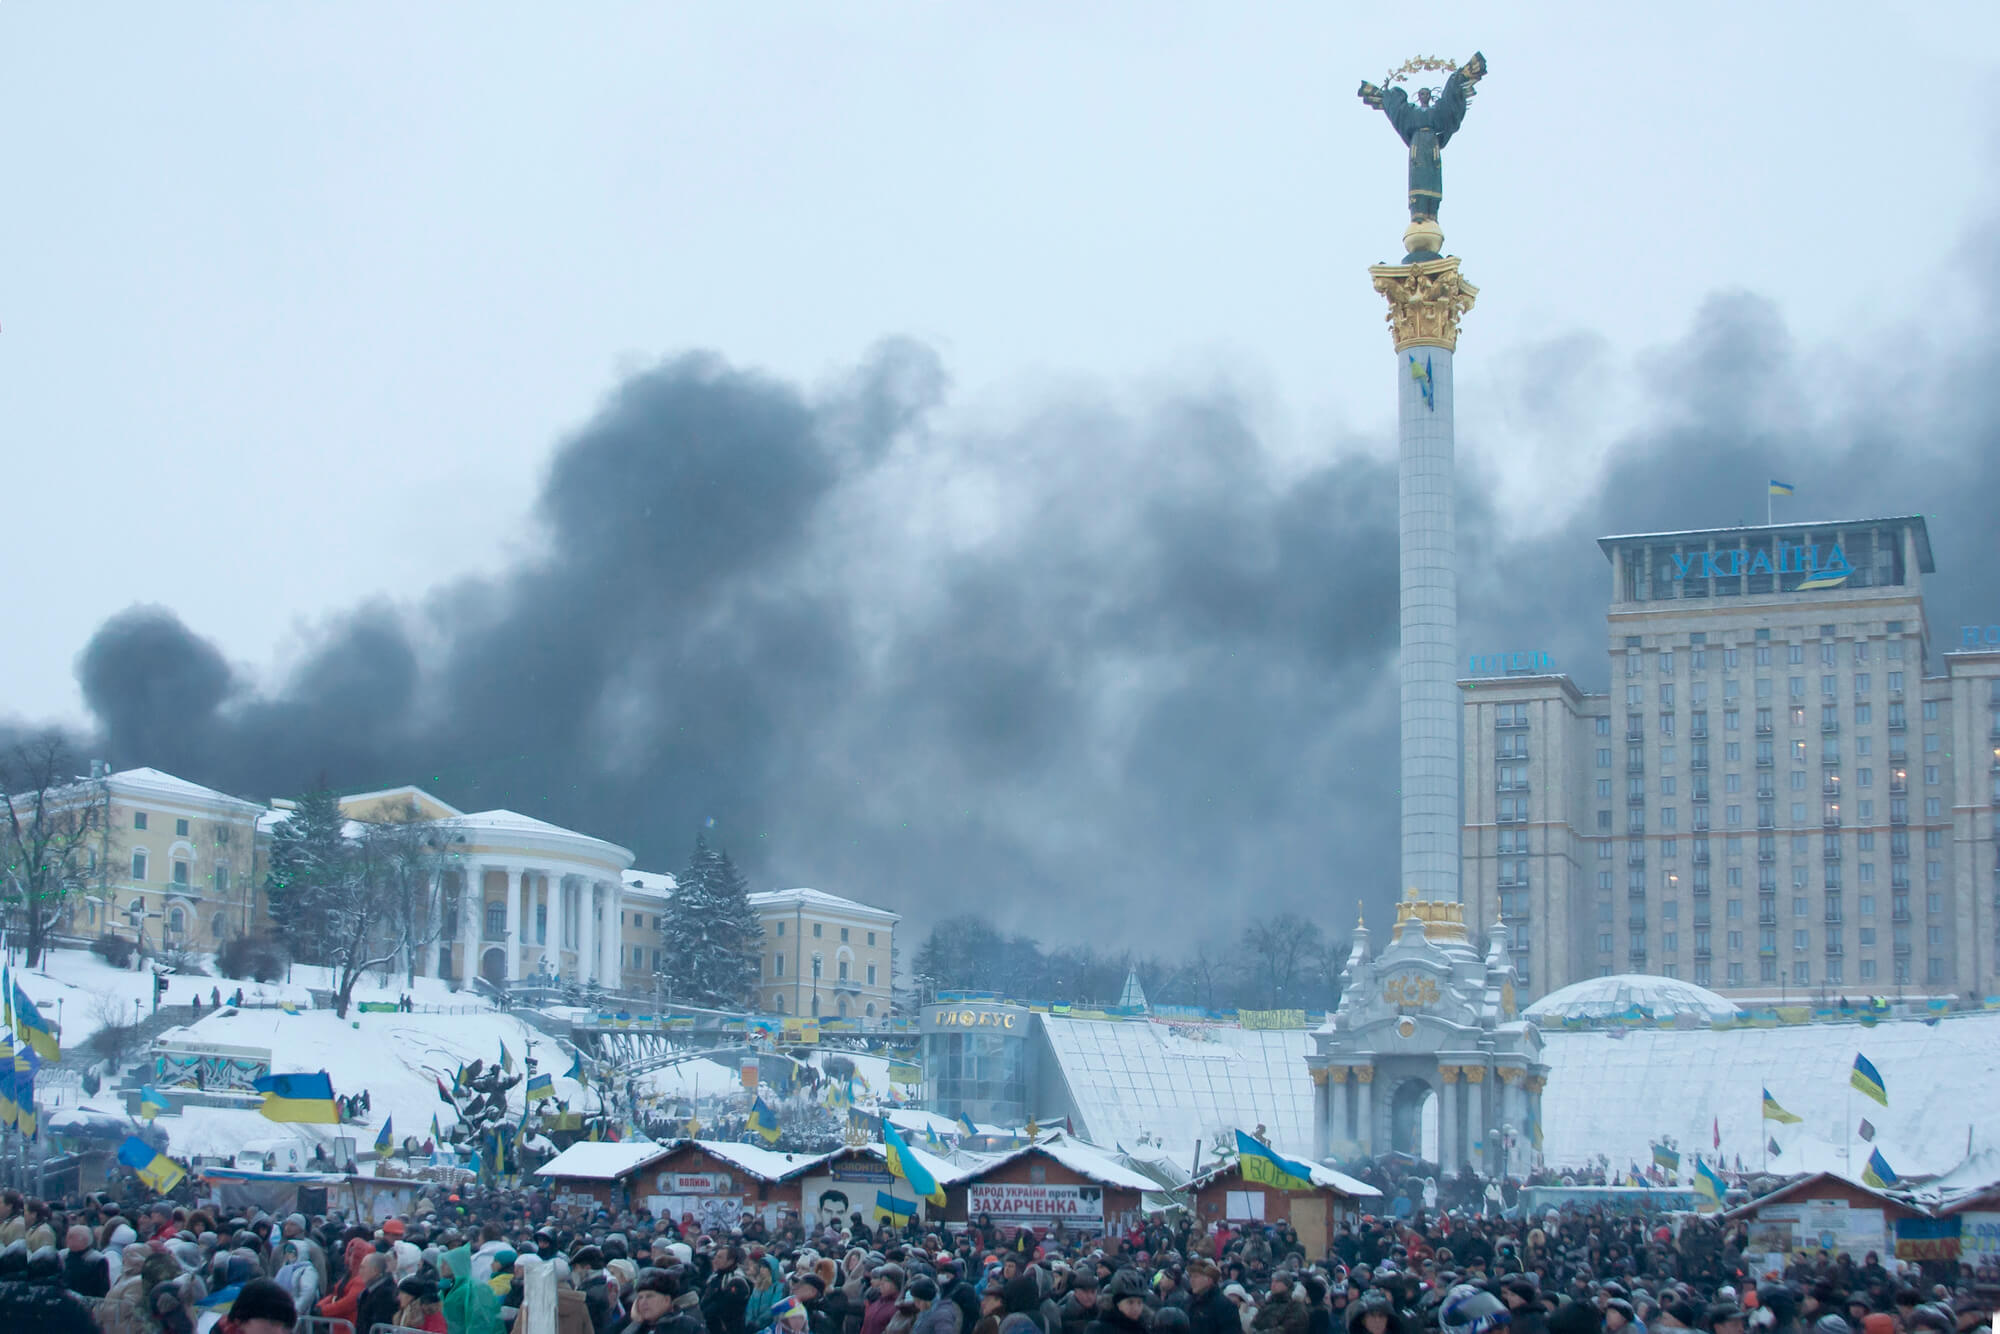 The Maidan in 2014 is a coup d’etat: a review of Italian and German pro-Russian media